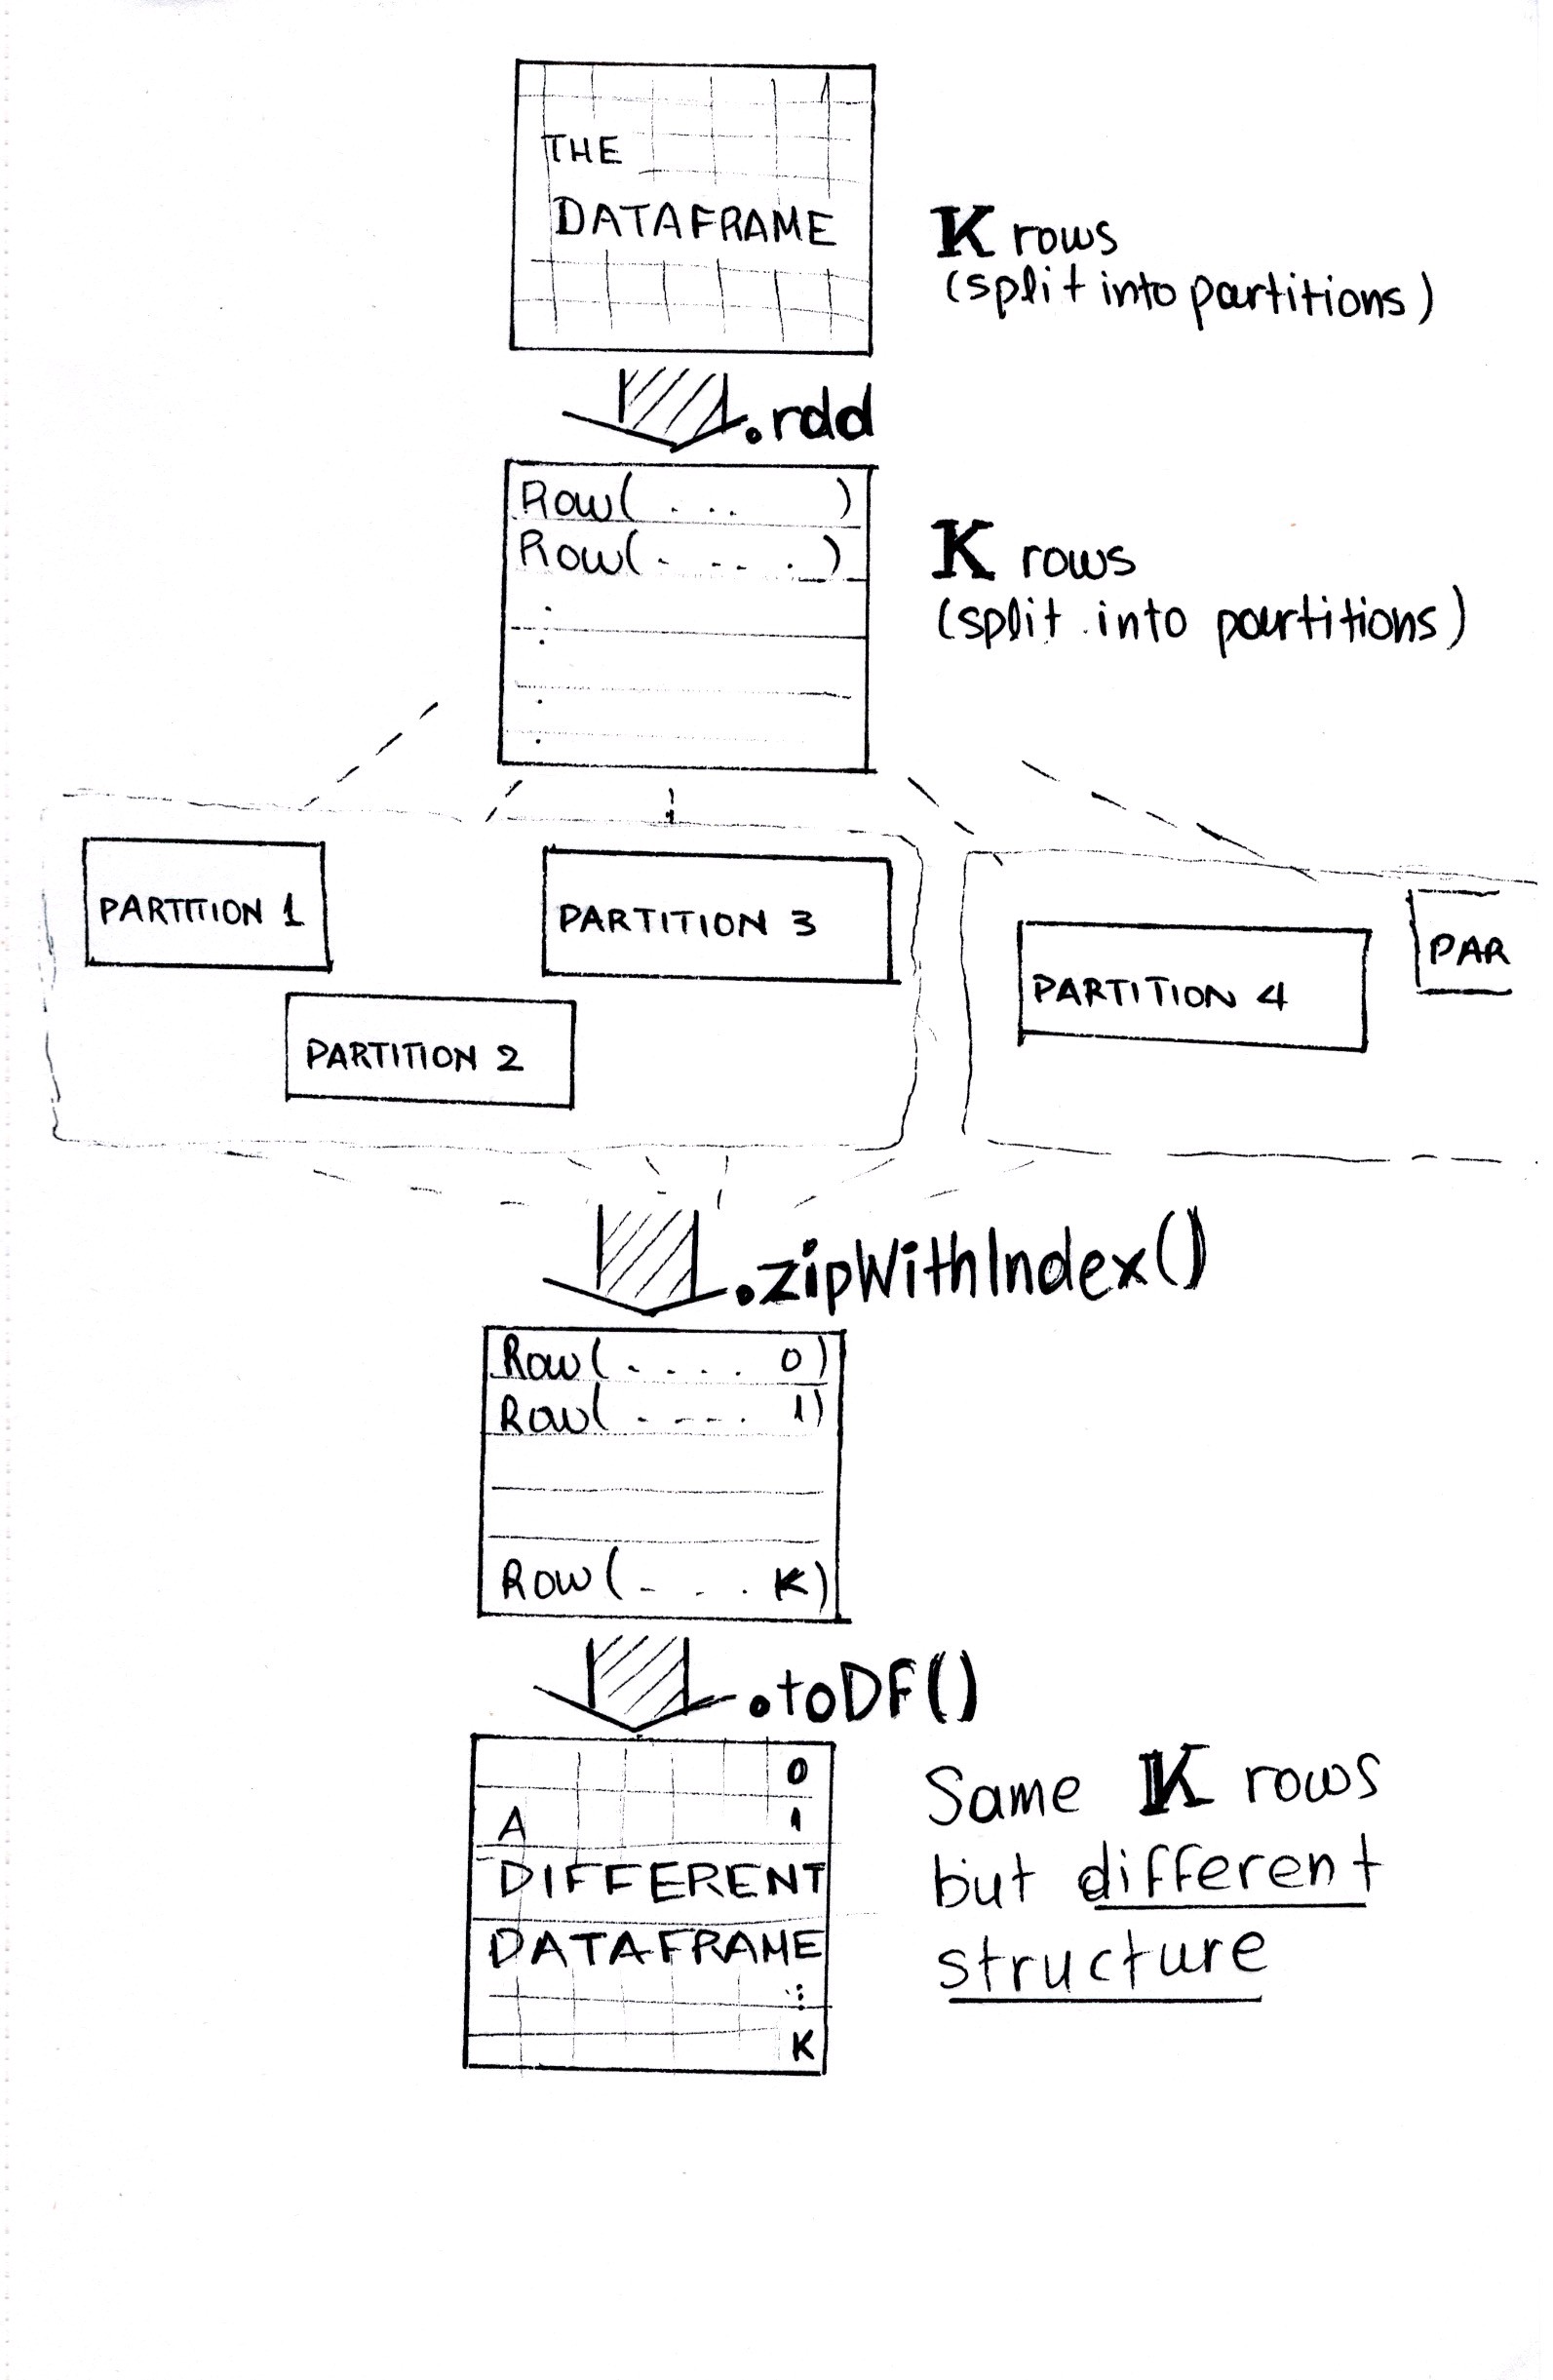 The process of using zipWithIndex()